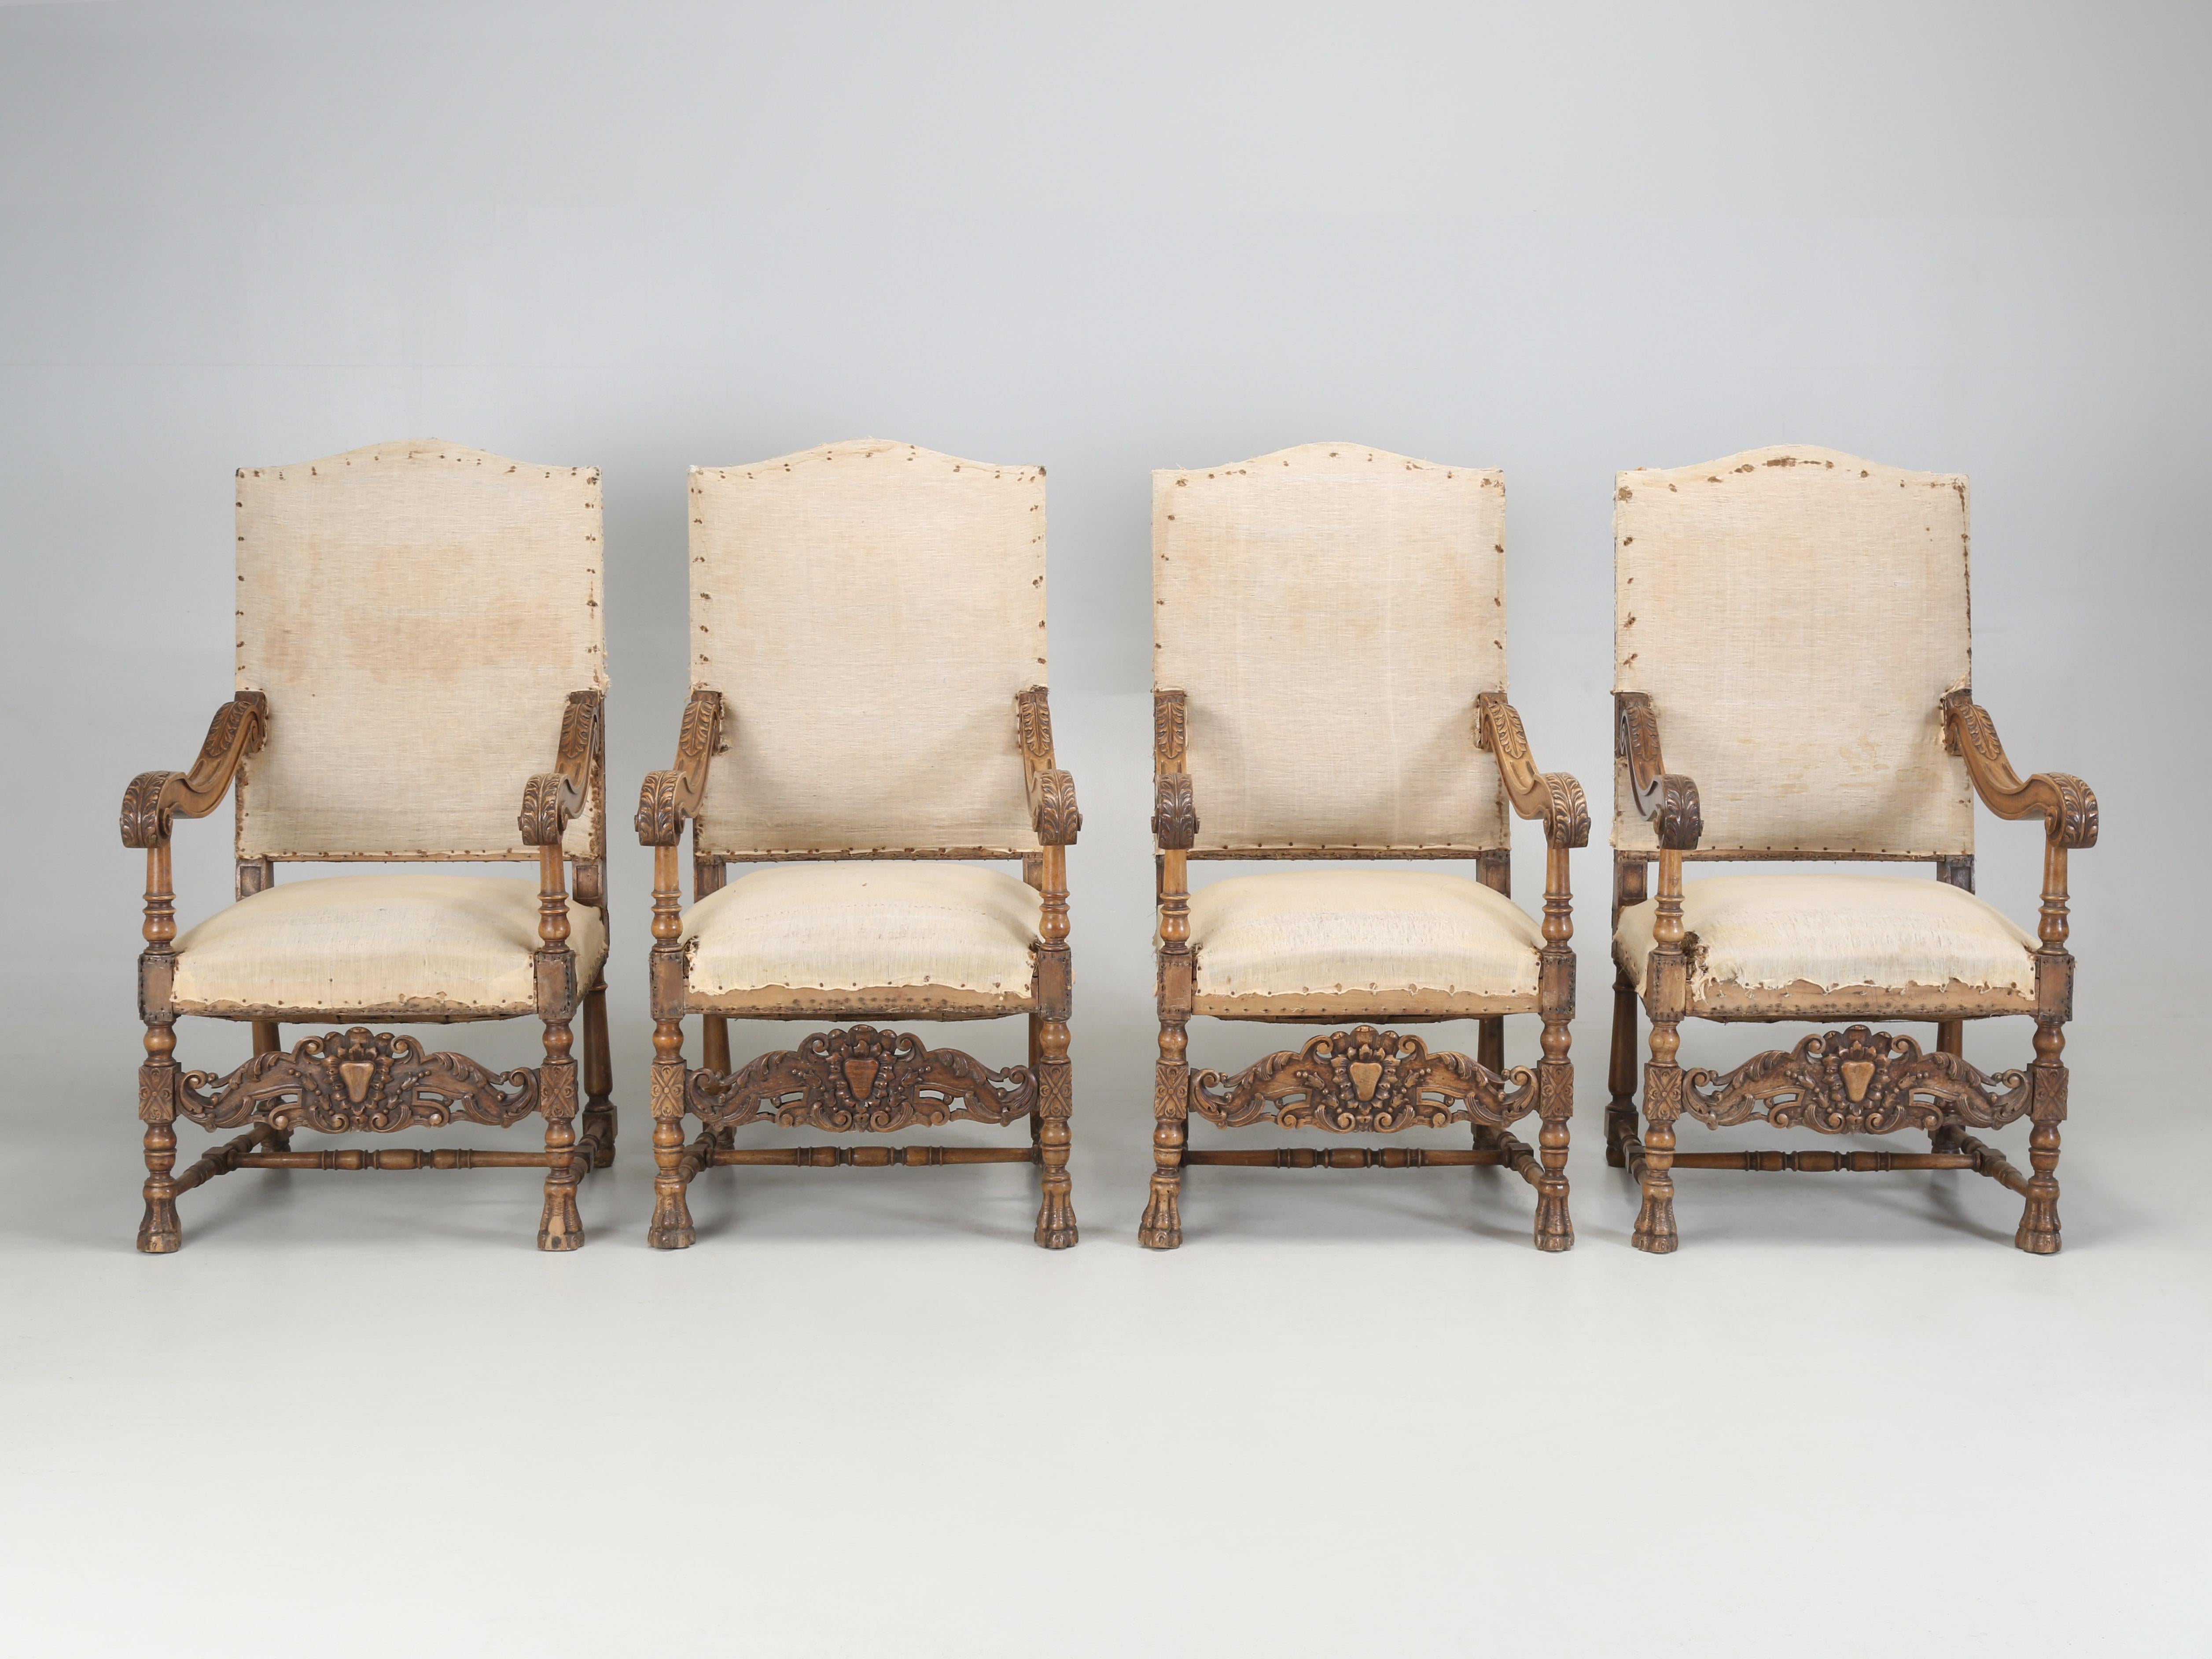 Antique Pair of Italian Armchairs Hand Carved Walnut Require Restoration, C1880s For Sale 12